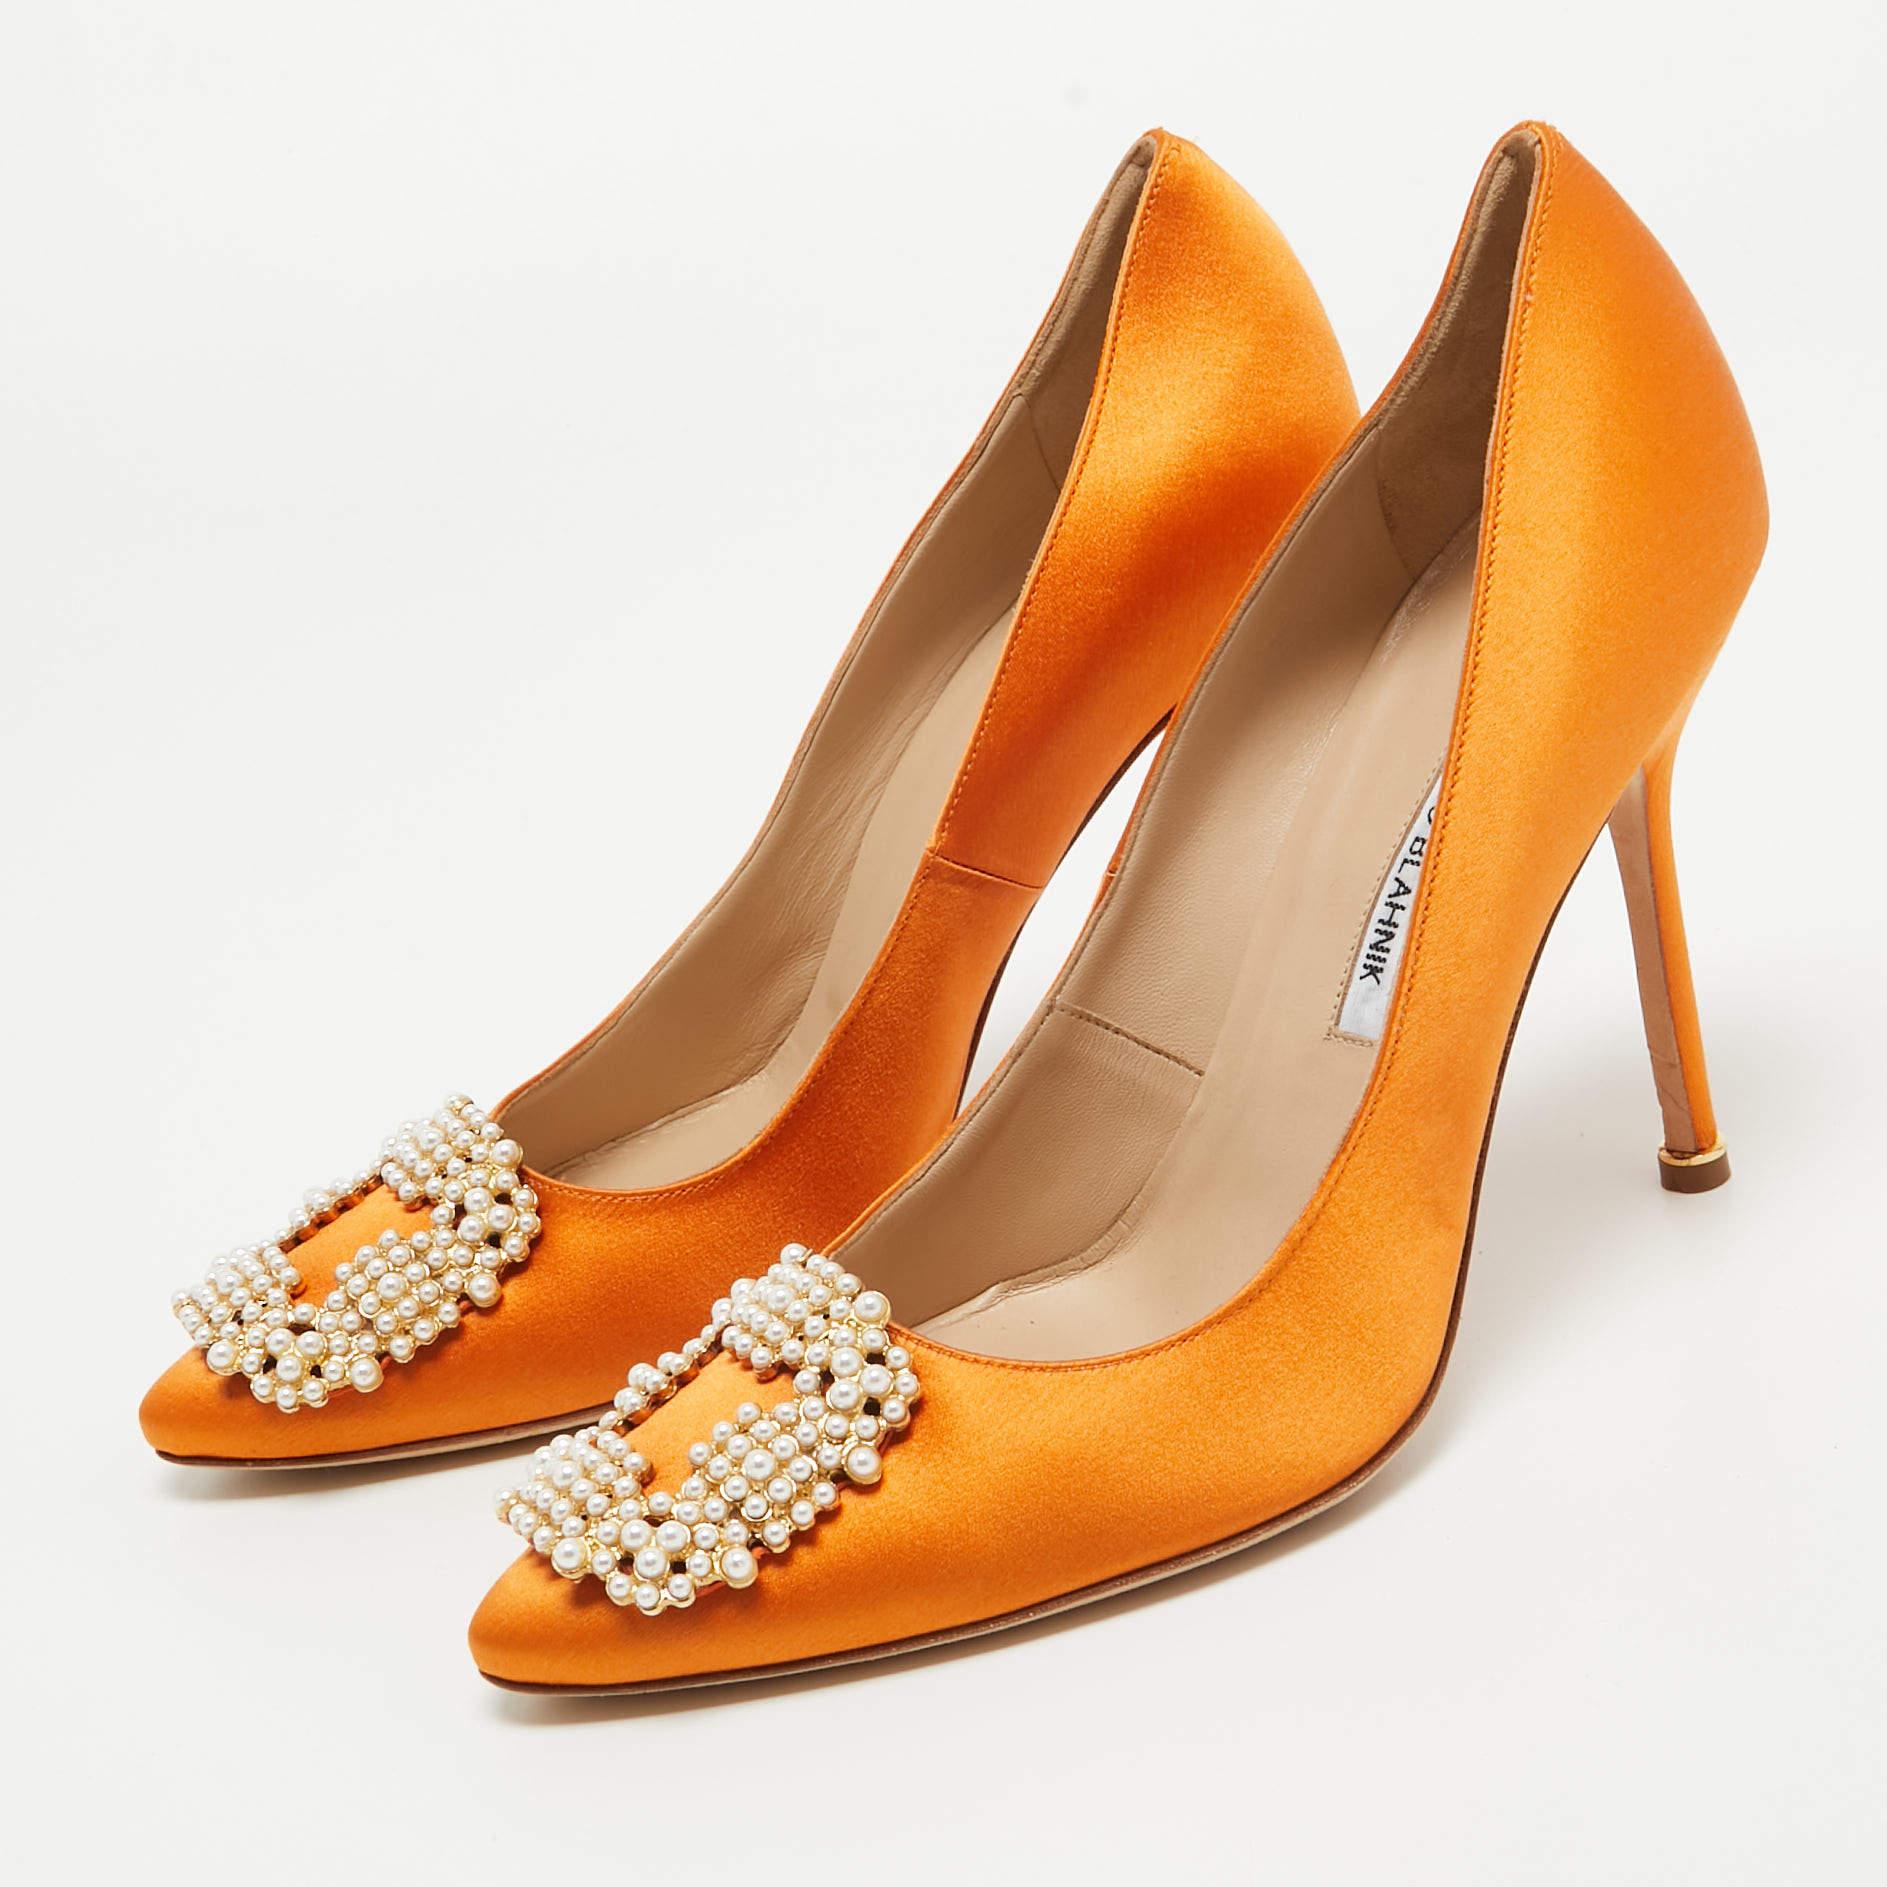 Perfectly sewn and finished to ensure an elegant look and fit, these Manolo Blahnik orange pumps are a purchase you'll love flaunting. They look great on the feet.

Includes
Original Dustbag